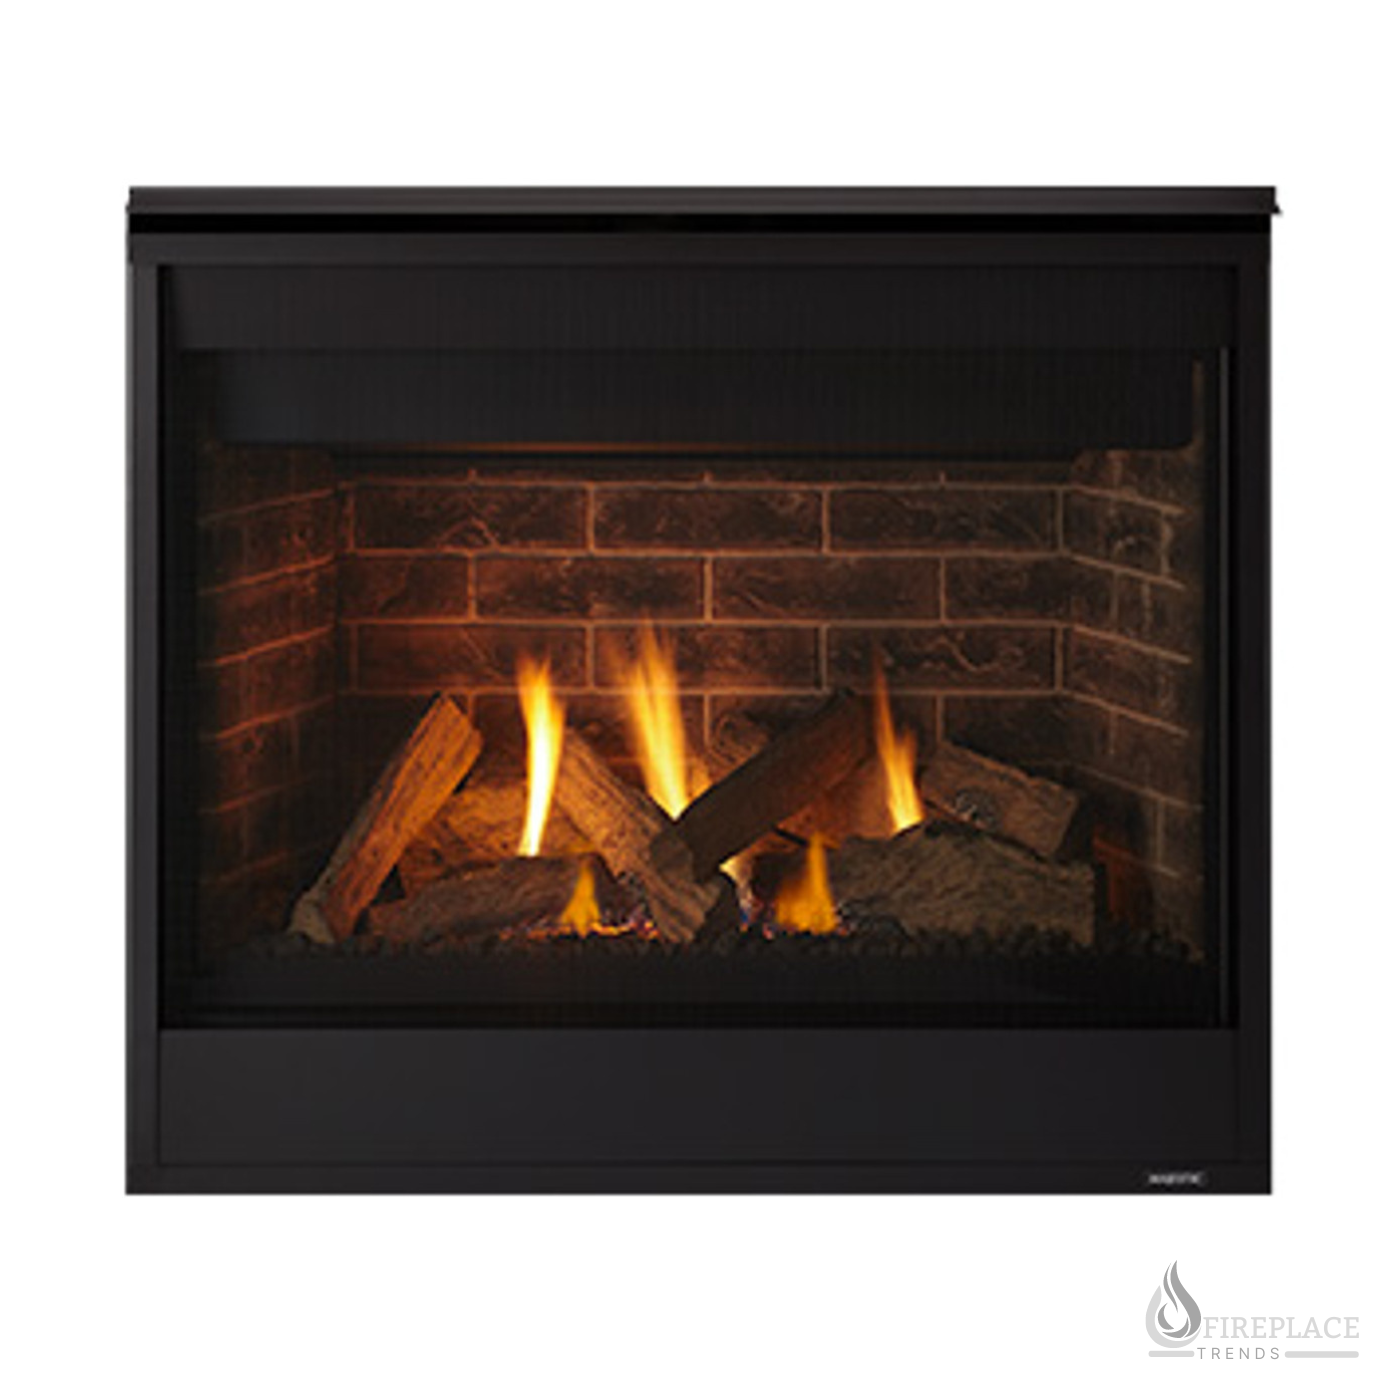 Majestic - Quartz 42" Direct Vent Traditional Gas Fireplace with IntelliFire Touch ignition